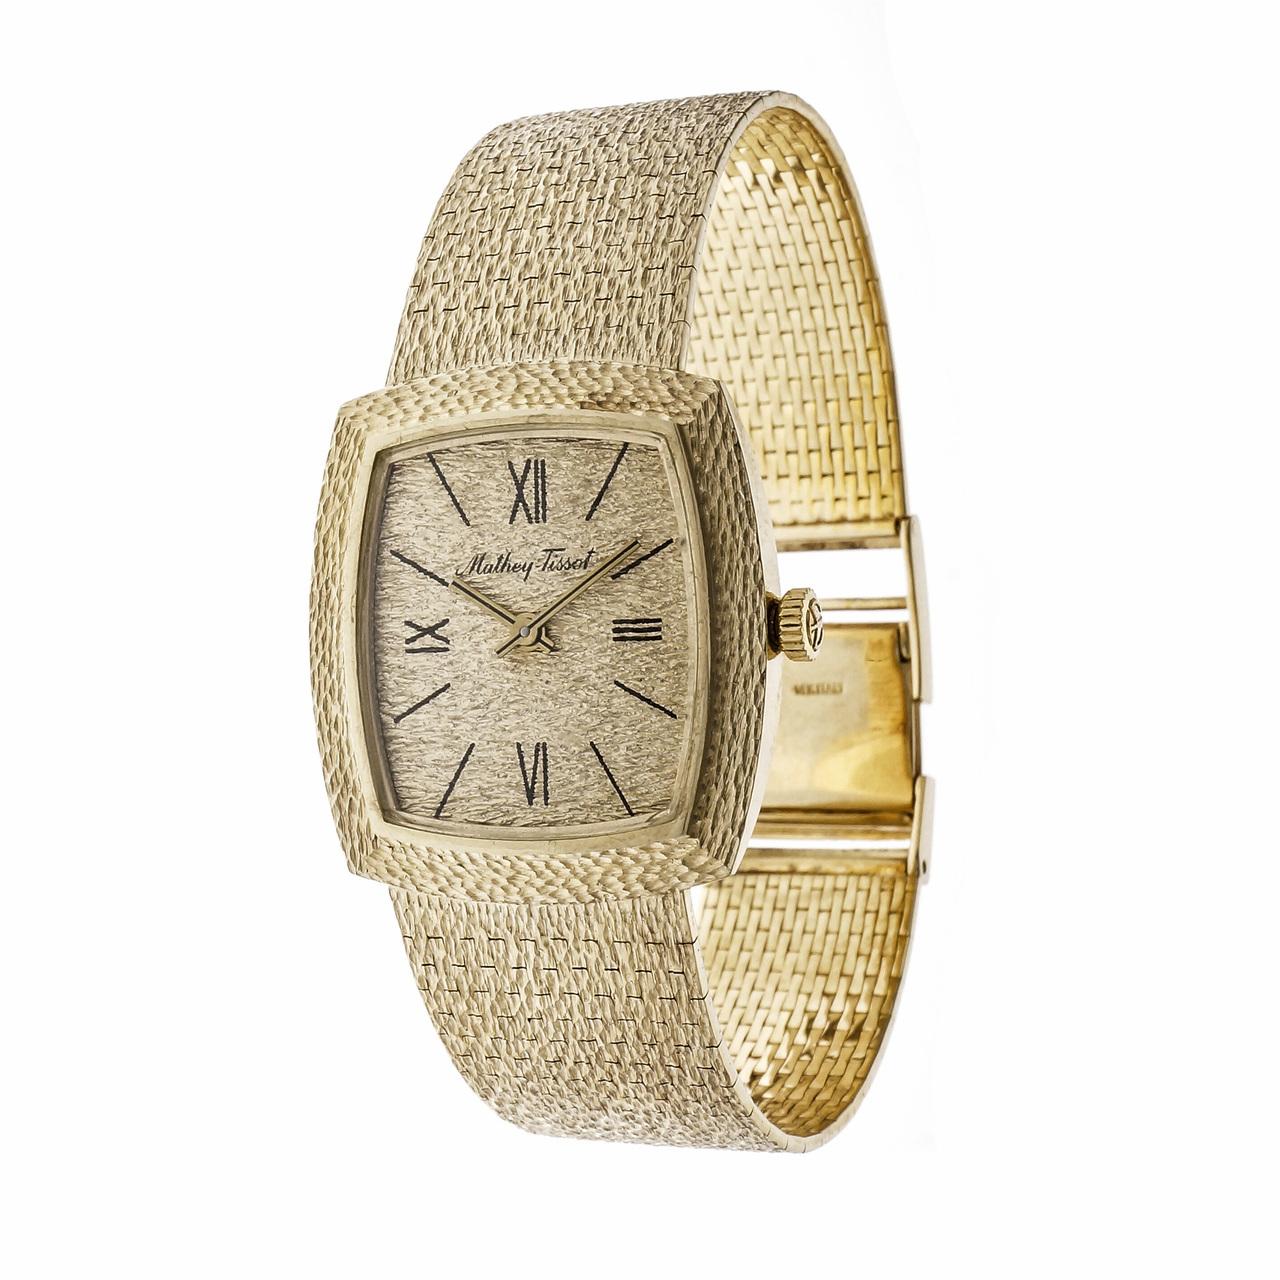 Vintage 1960 -1970 Mathey Tissot solid 14k gold dress watch with a hand textured case, band and dial. 

14k yellow gold
56.1 grams
Band length: 7.25 inches
Length: 28mm
Width: 27mm
Band width at case: 17.6mm
Case thickness: 7.1mm
Band: 585 14k